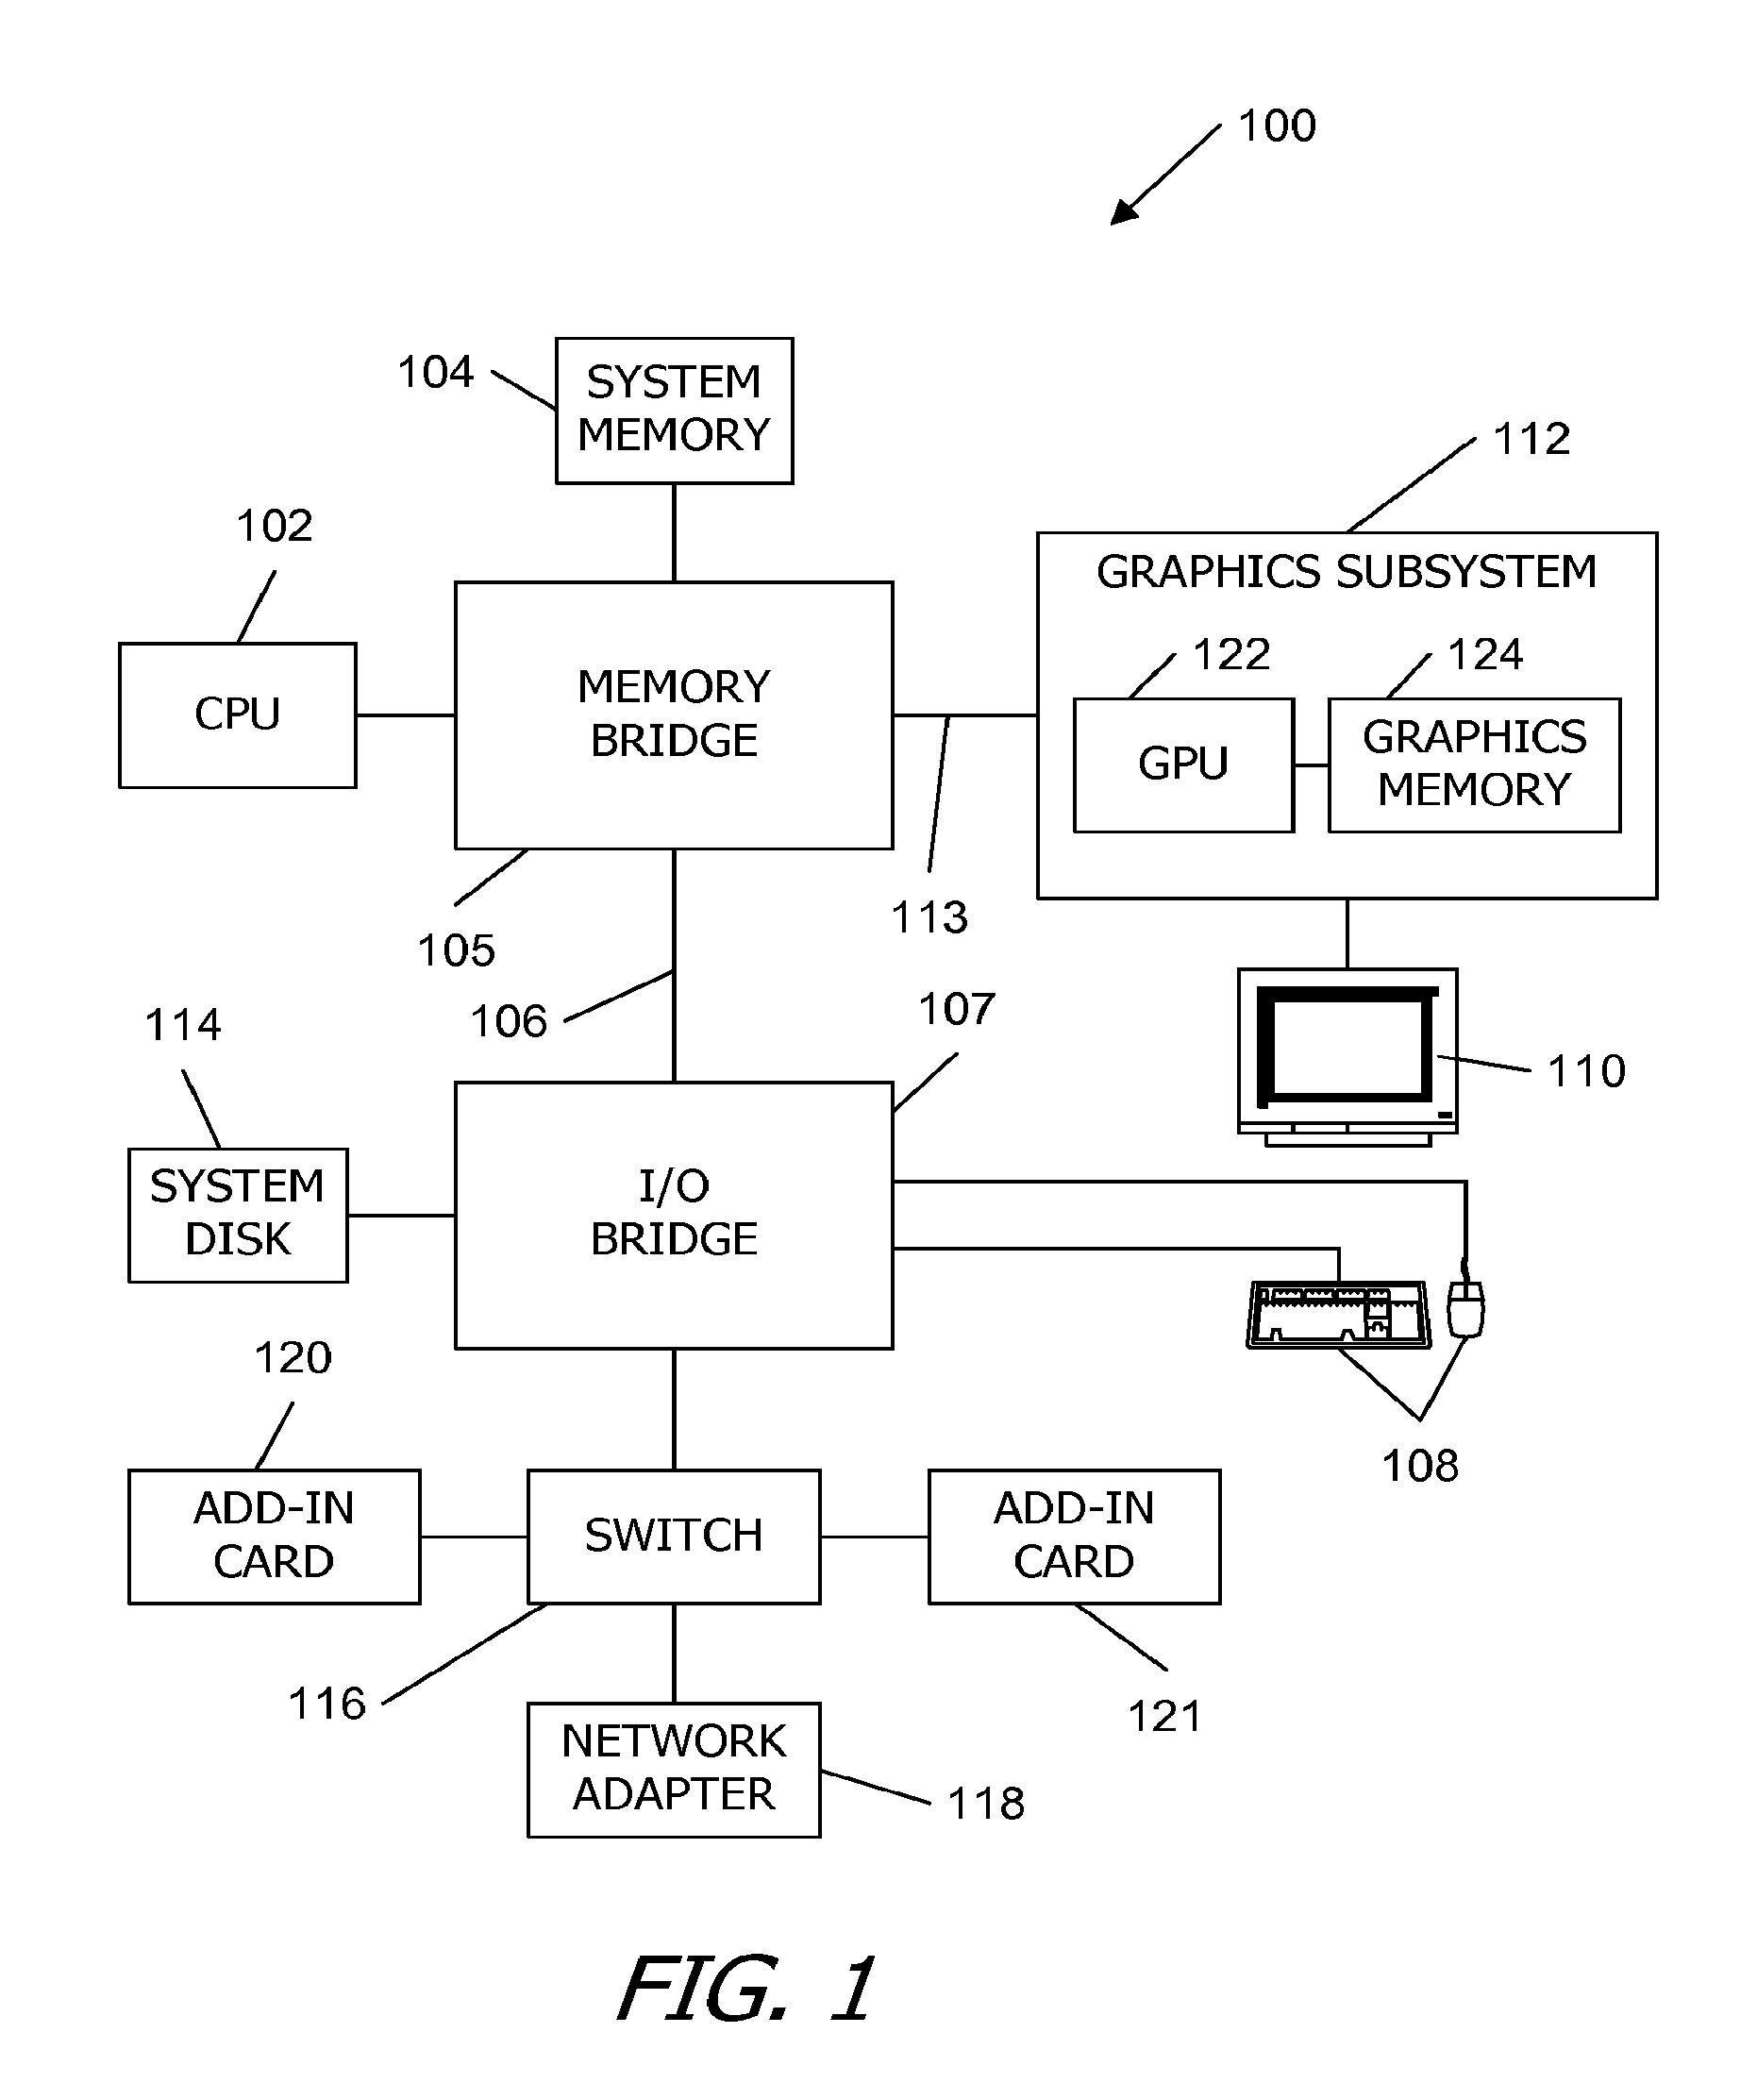 Maximized memory throughput on parallel processing devices